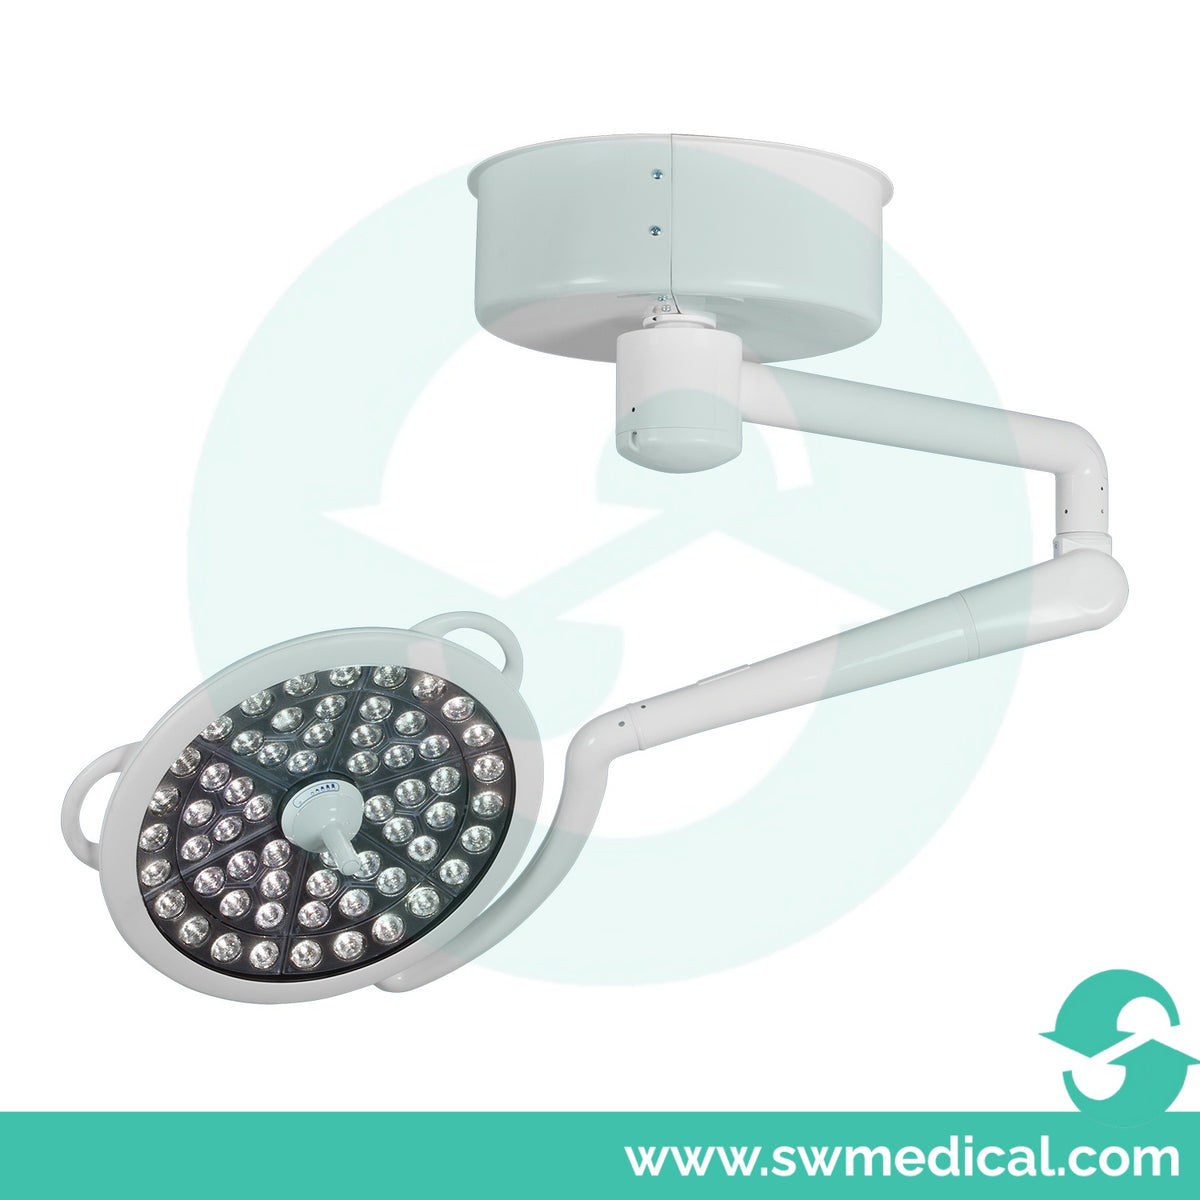 Medical Illumination System Two Solo Surgical Lights